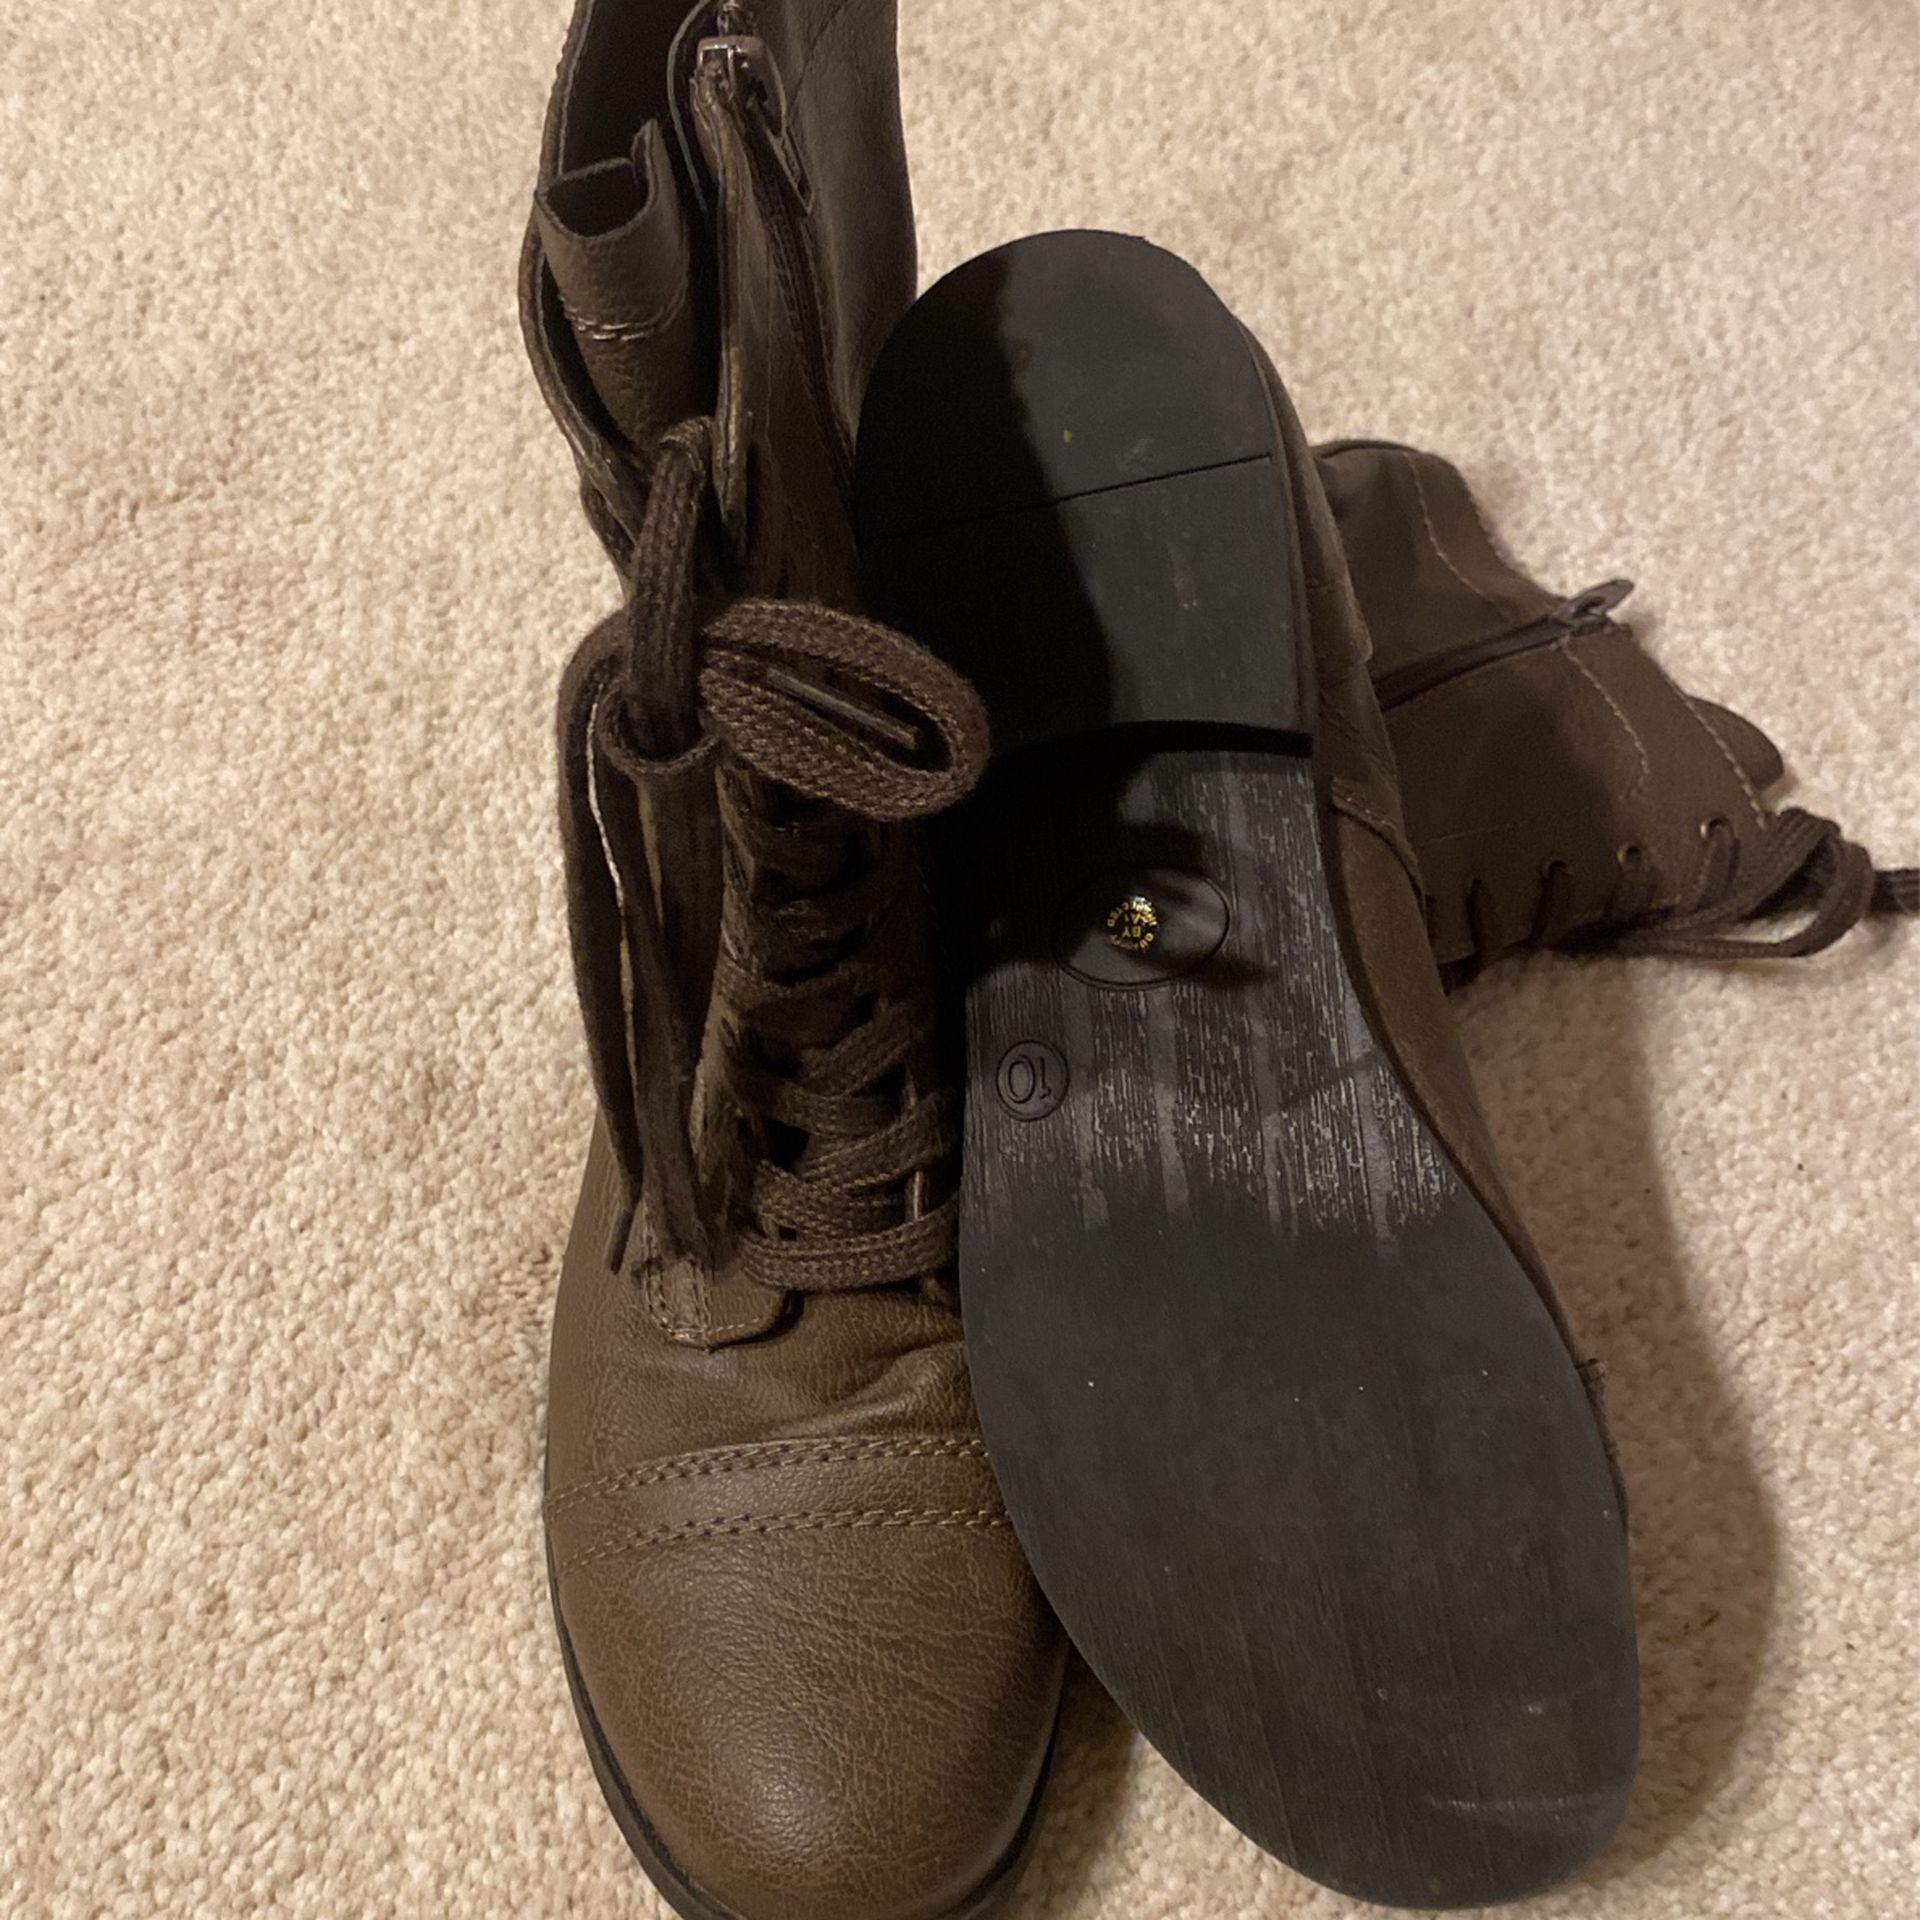 Women’s Boots, Size 10